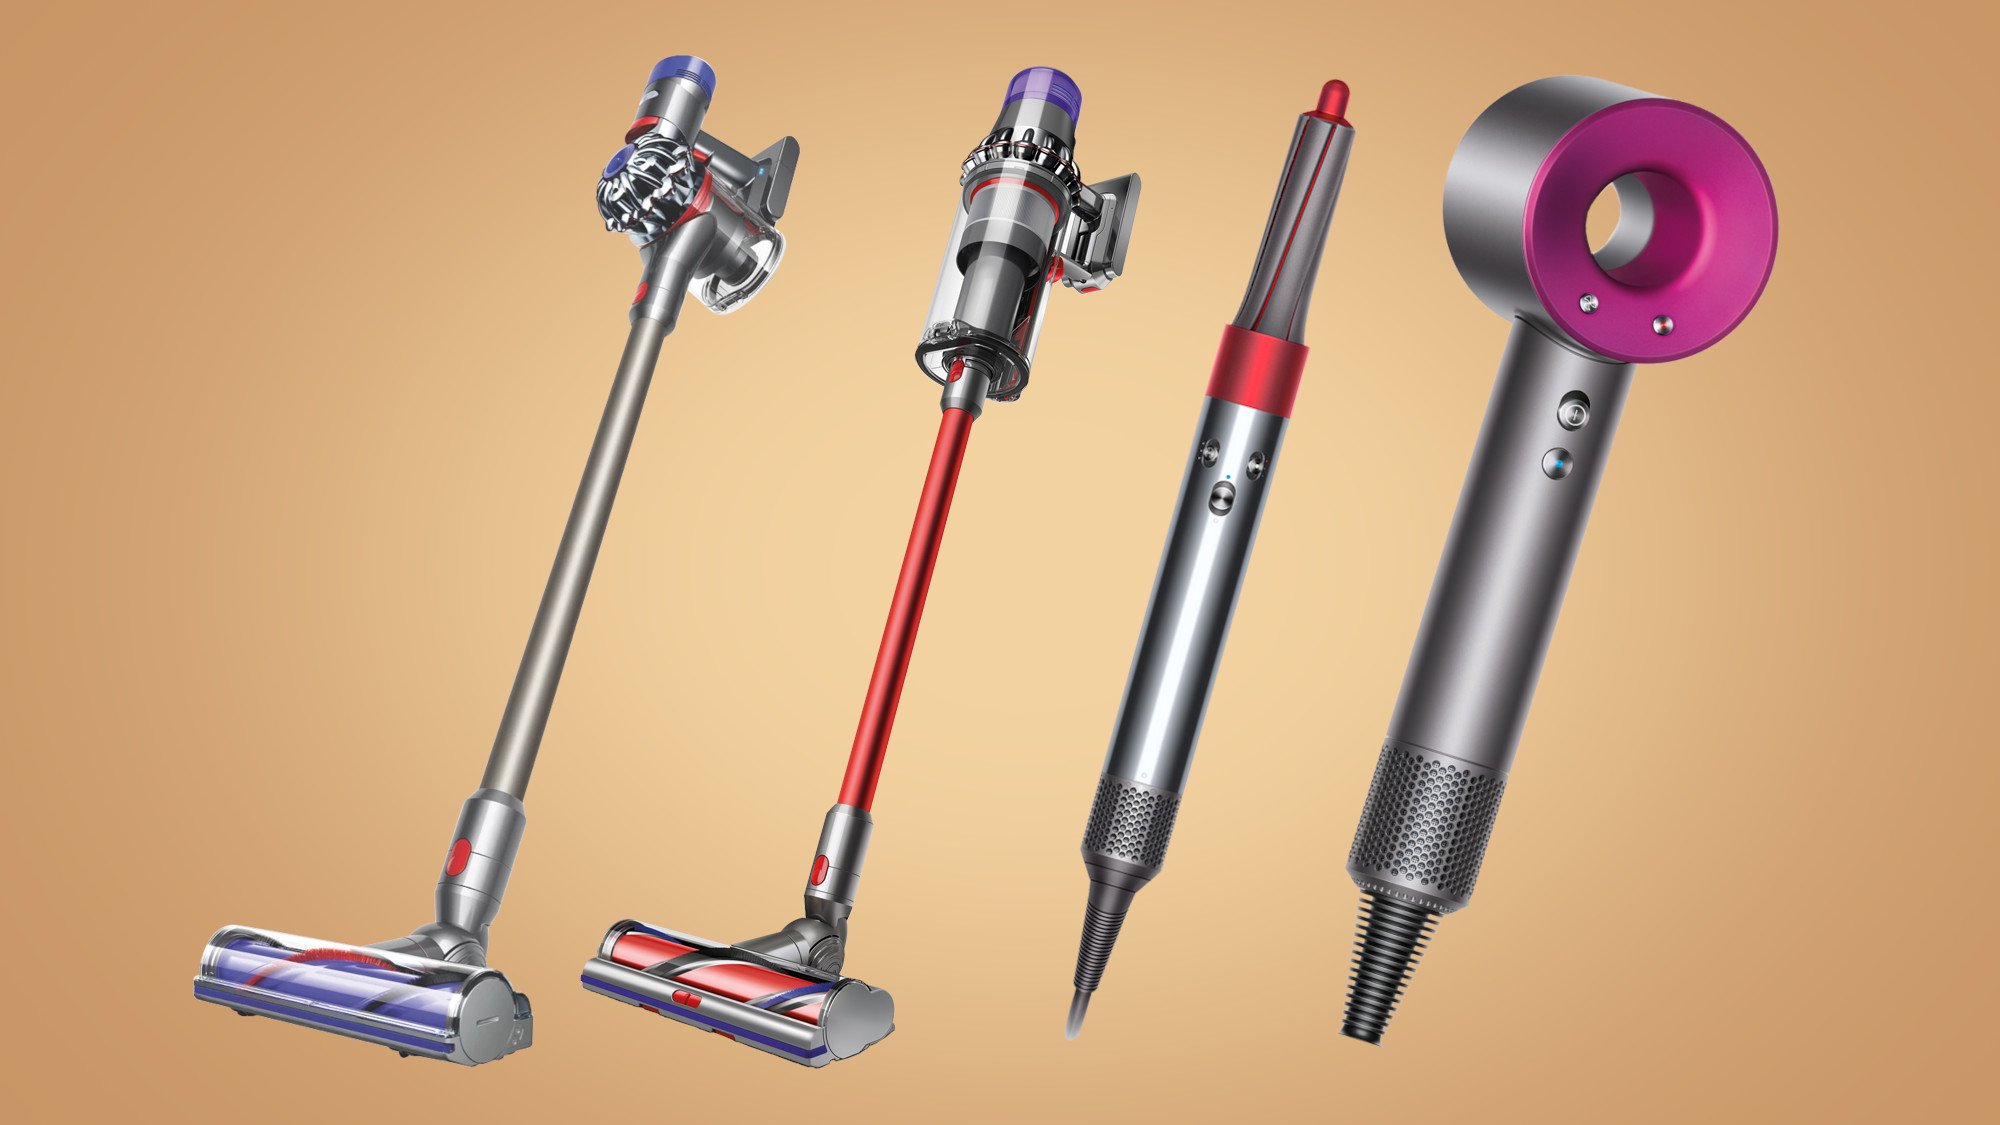 Two Dyson vacuum cleaners and two Dyson hair stylers on a gold gradient background